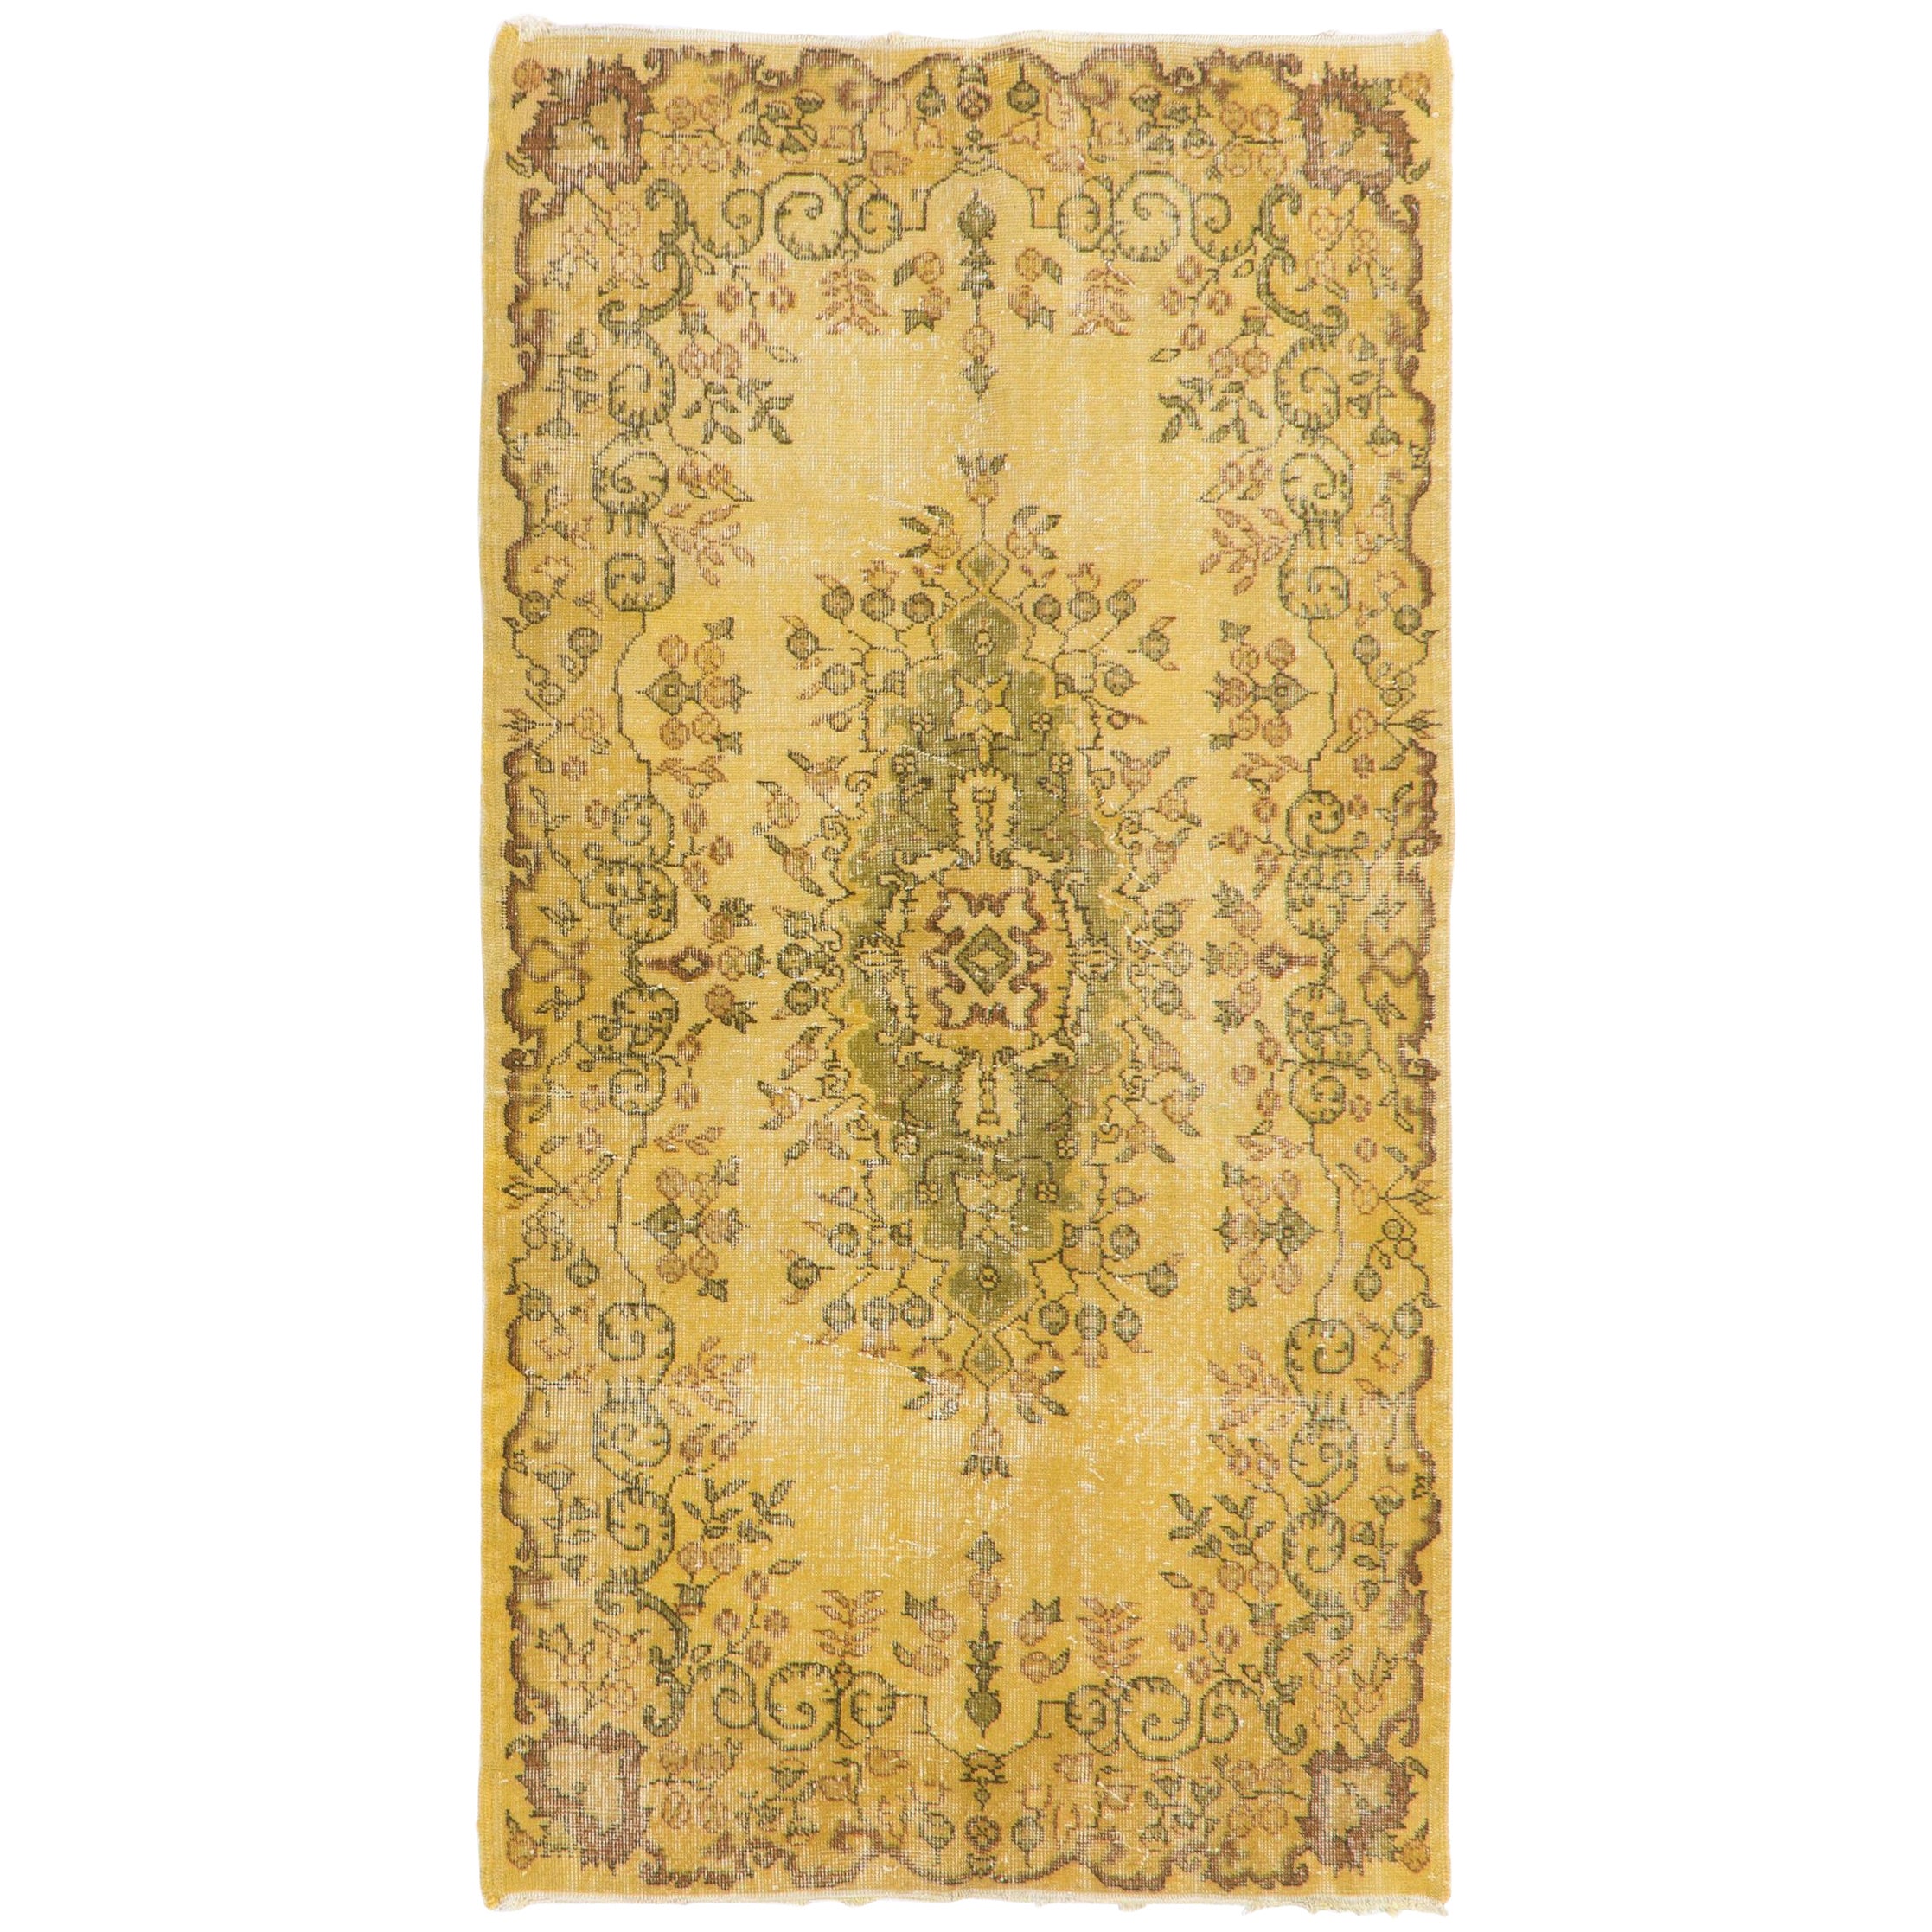 3.8x7.2 Ft Hand-knotted Wool Floral Medallion Rug. Vintage Turkish Yellow Carpet